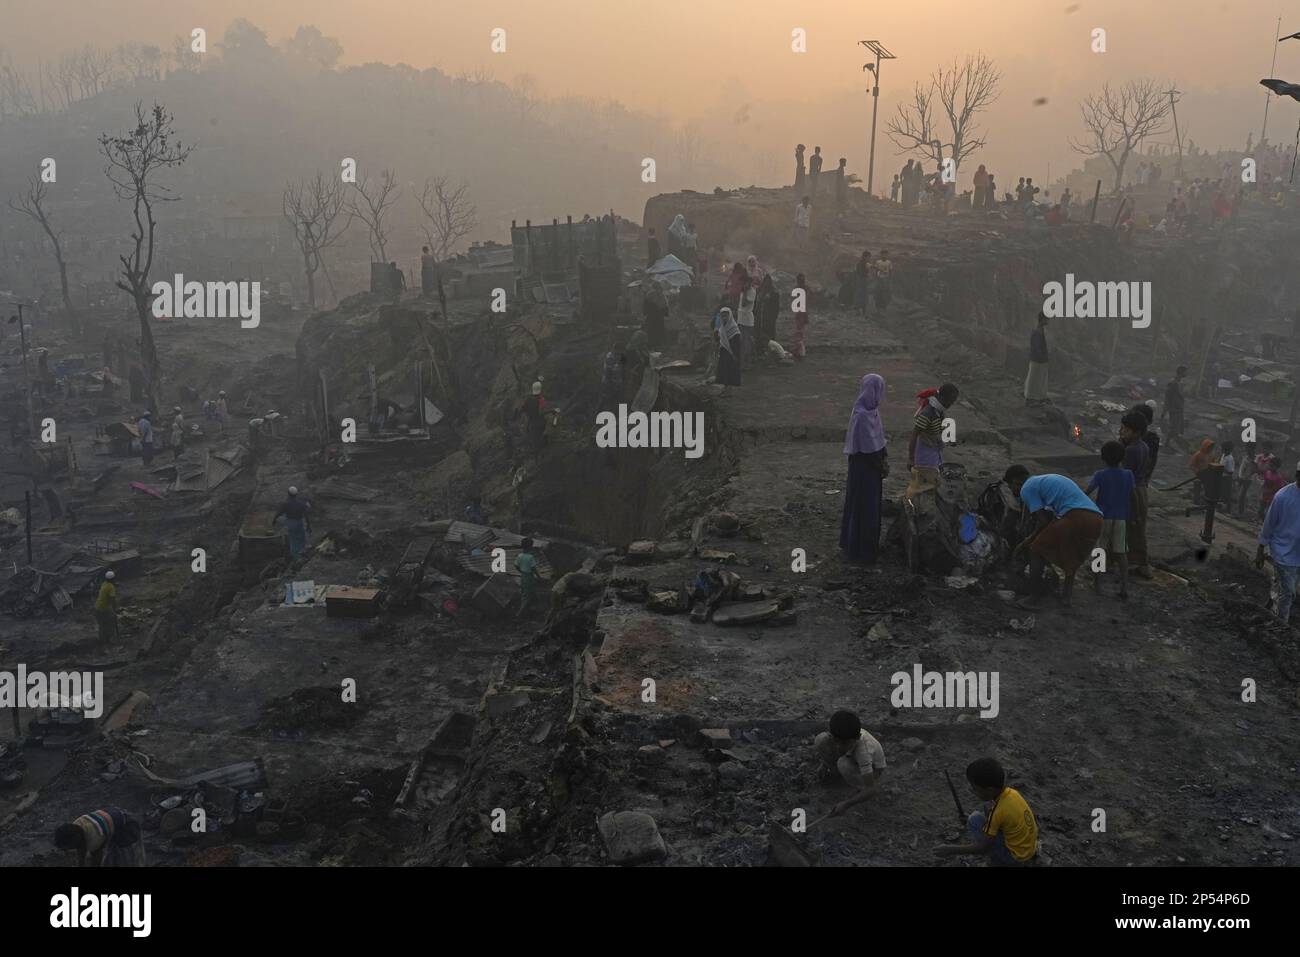 KUTUPALONG, Chittagong, Bangladesh. 7th Mar, 2023. KUTUPALONG, Bangladesh: A fire destroyed 2,000 shelters at a Rohingya refugee camp in southeastern Bangladesh on Sunday, leaving about 12,000 people without shelter.The fire broke out at about 2:45 p.m. at Camp No. 11 in Kutupalong, one of the world's largest refugee settlements, and rapidly engulfed the bamboo-and-tarpaulin shelters, .''Some 2,000 shelters have been burnt, leaving about 12,000 forcibly displaced Myanmar nationals shelterless, '' .At least 35 mosques and 21 learning centers for the refugees were also destroyed, though there Stock Photo